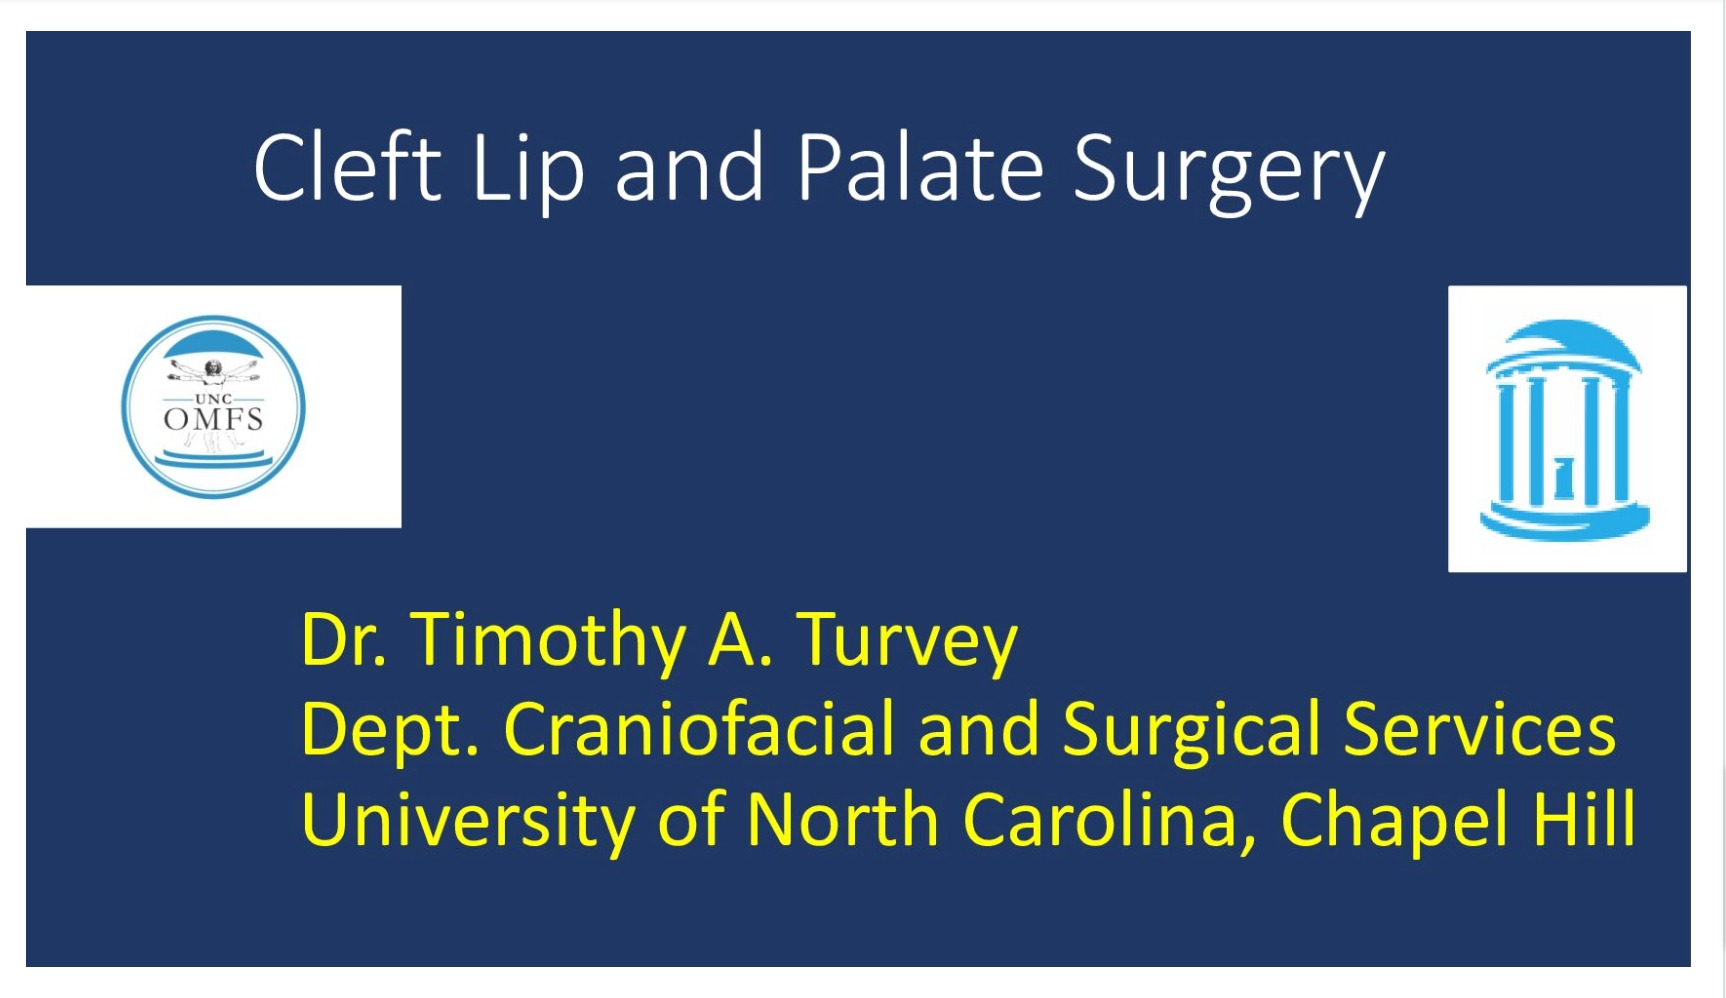 Cleft Lip, Palate and Alveolar Cleft Surgery: Timing, Surgical Approaches and Outcomes